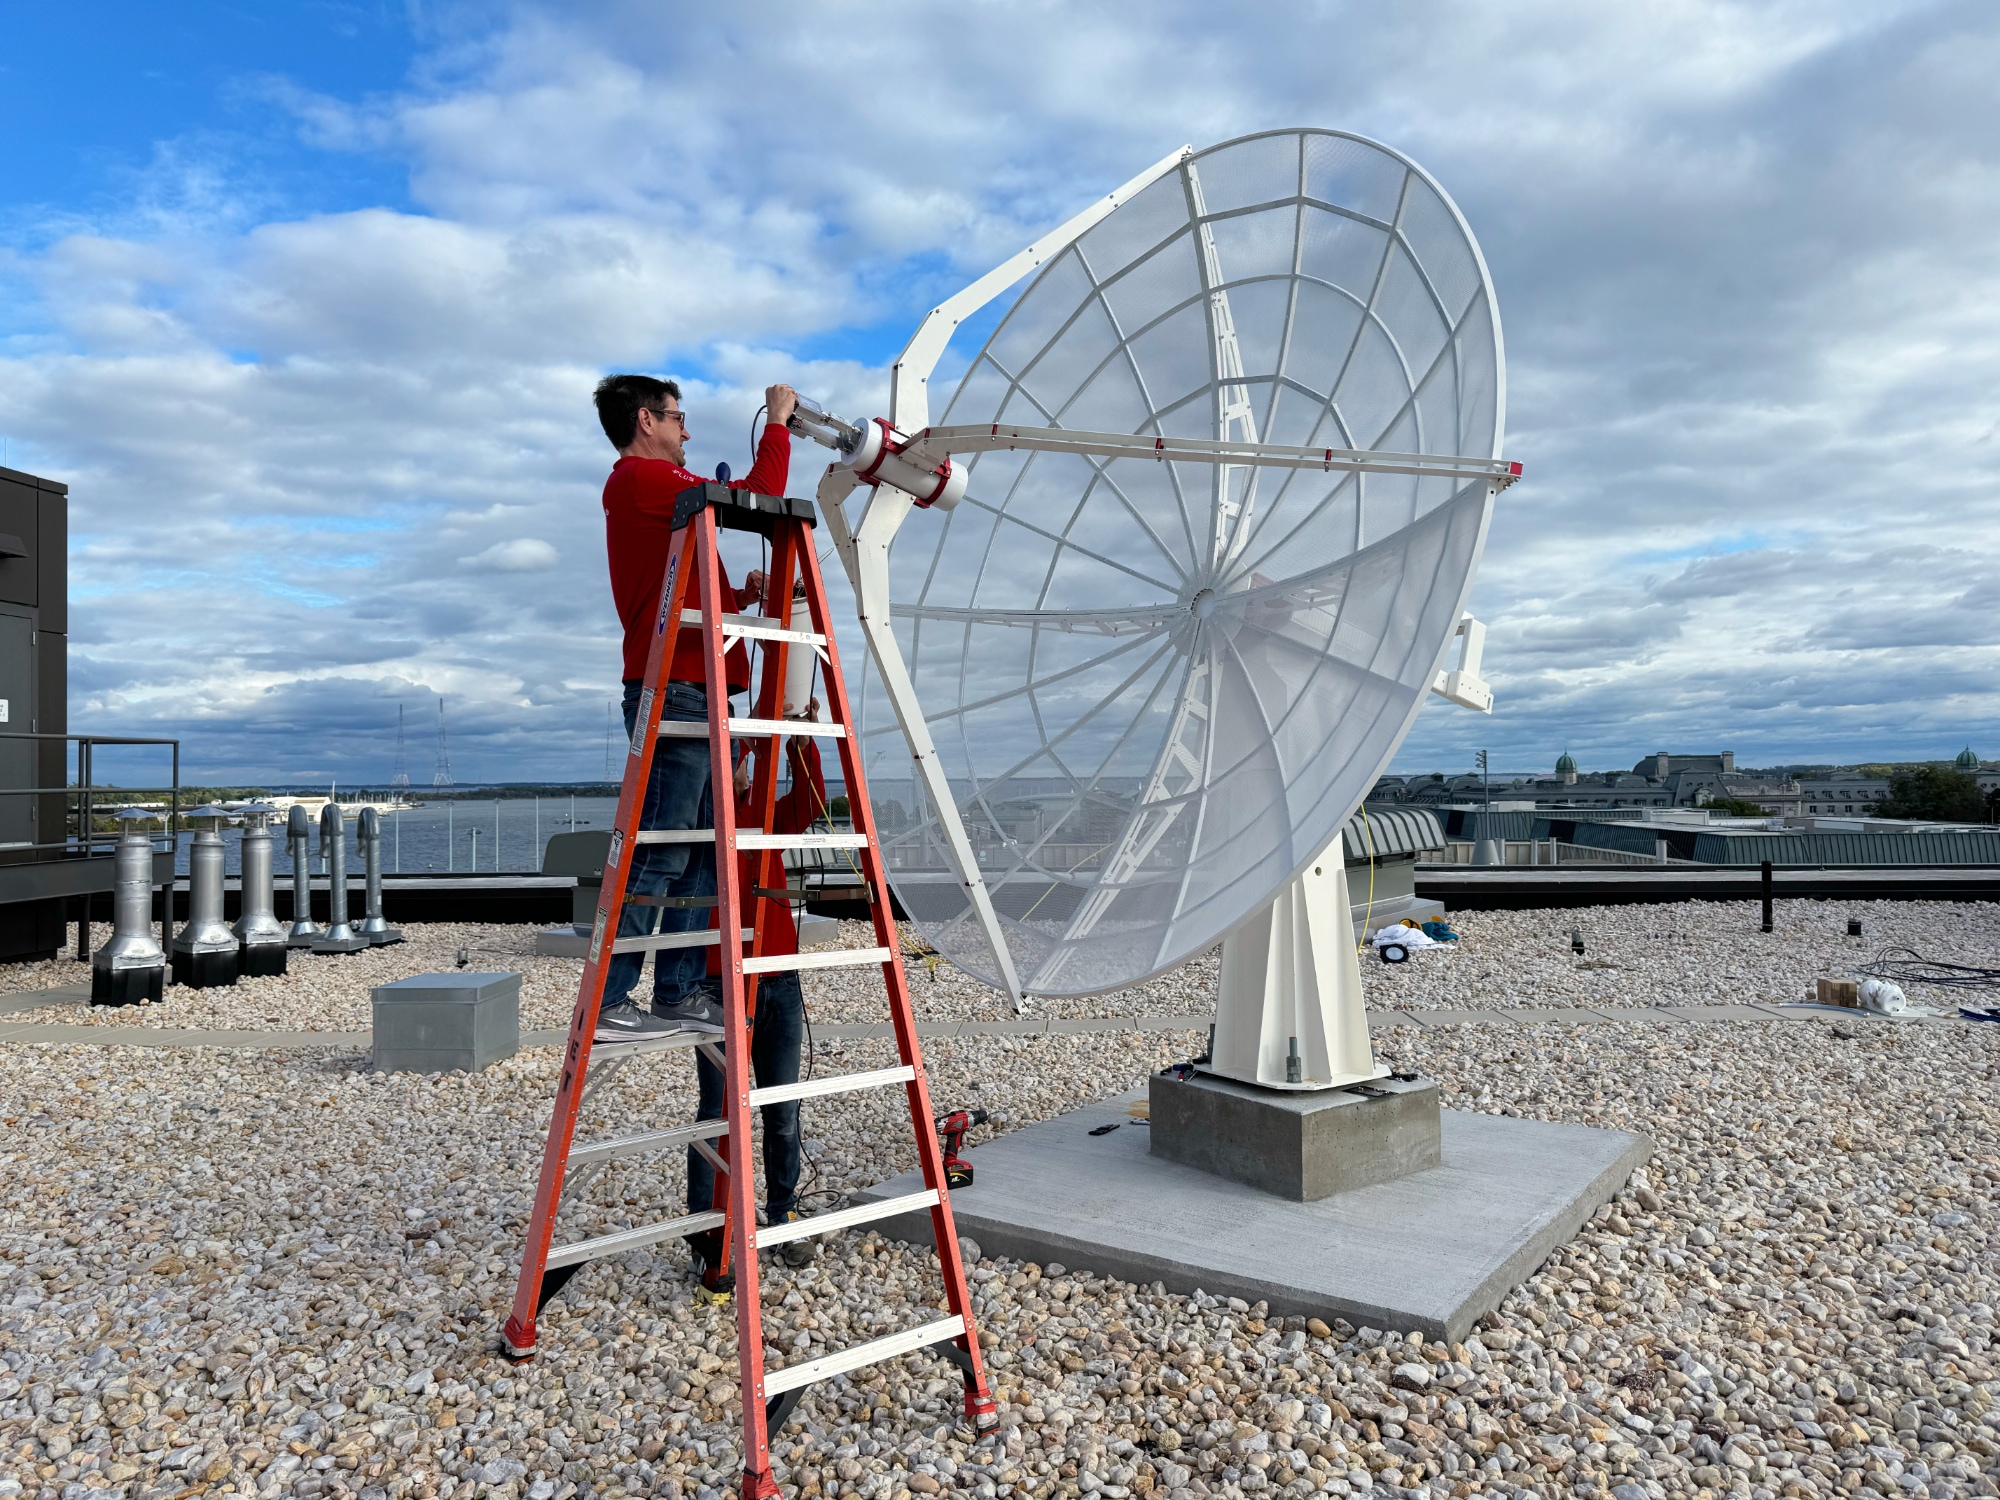 SPIDER 300A radio telescope installed at the U.S. Naval Academy, Annapolis, MD (USA)